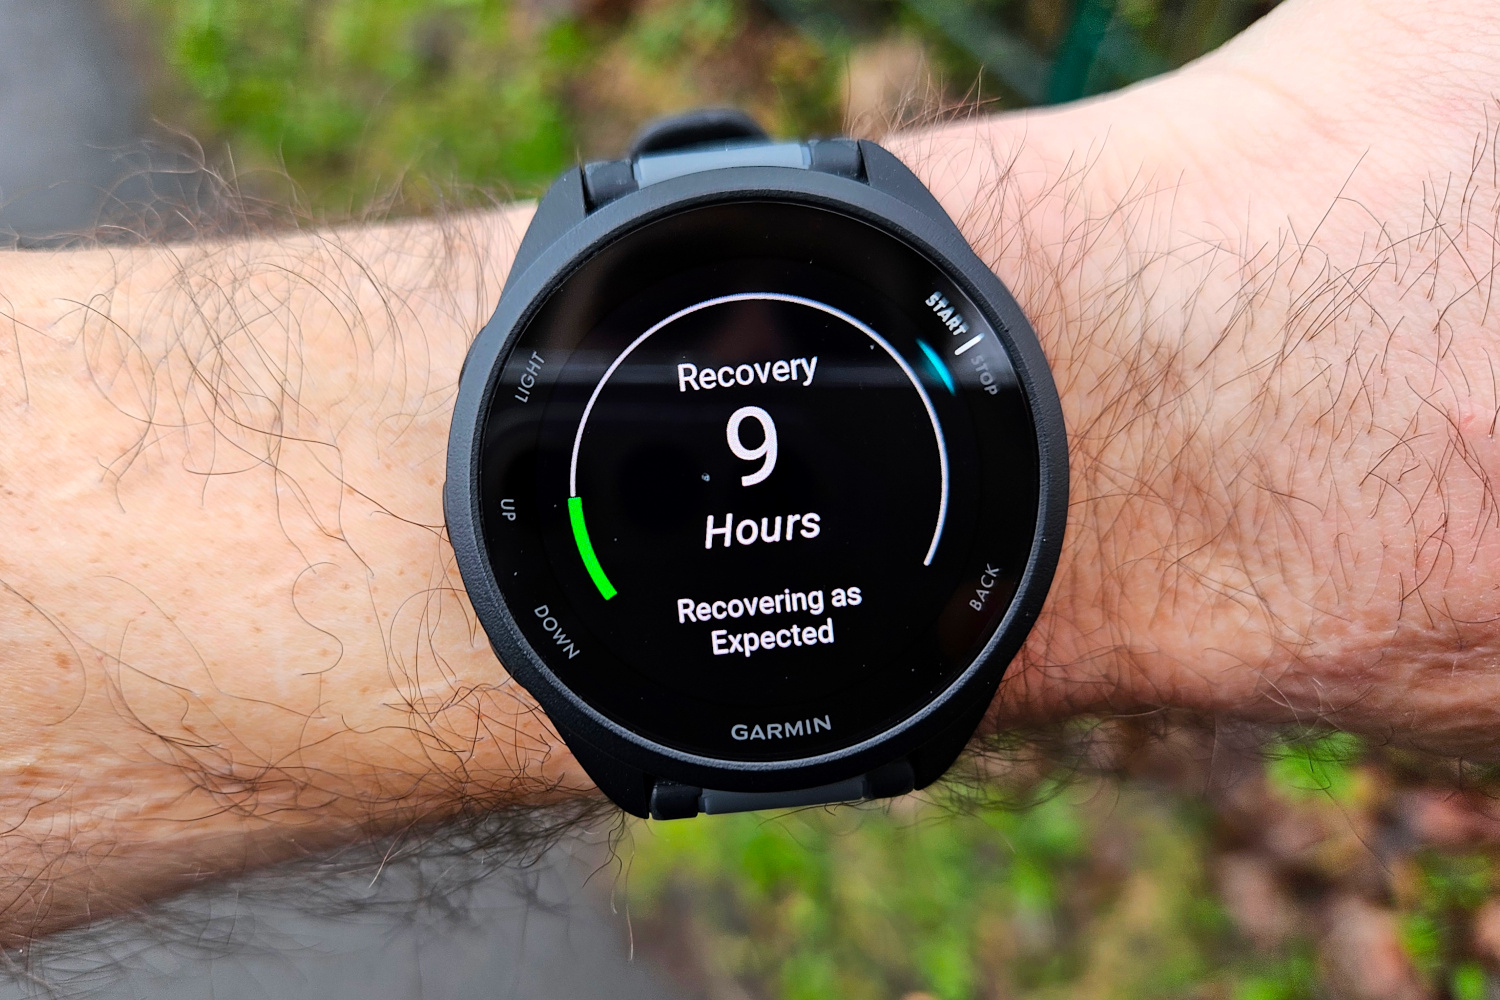 The Garmin Forerunner 165, showing a recovery time metric.